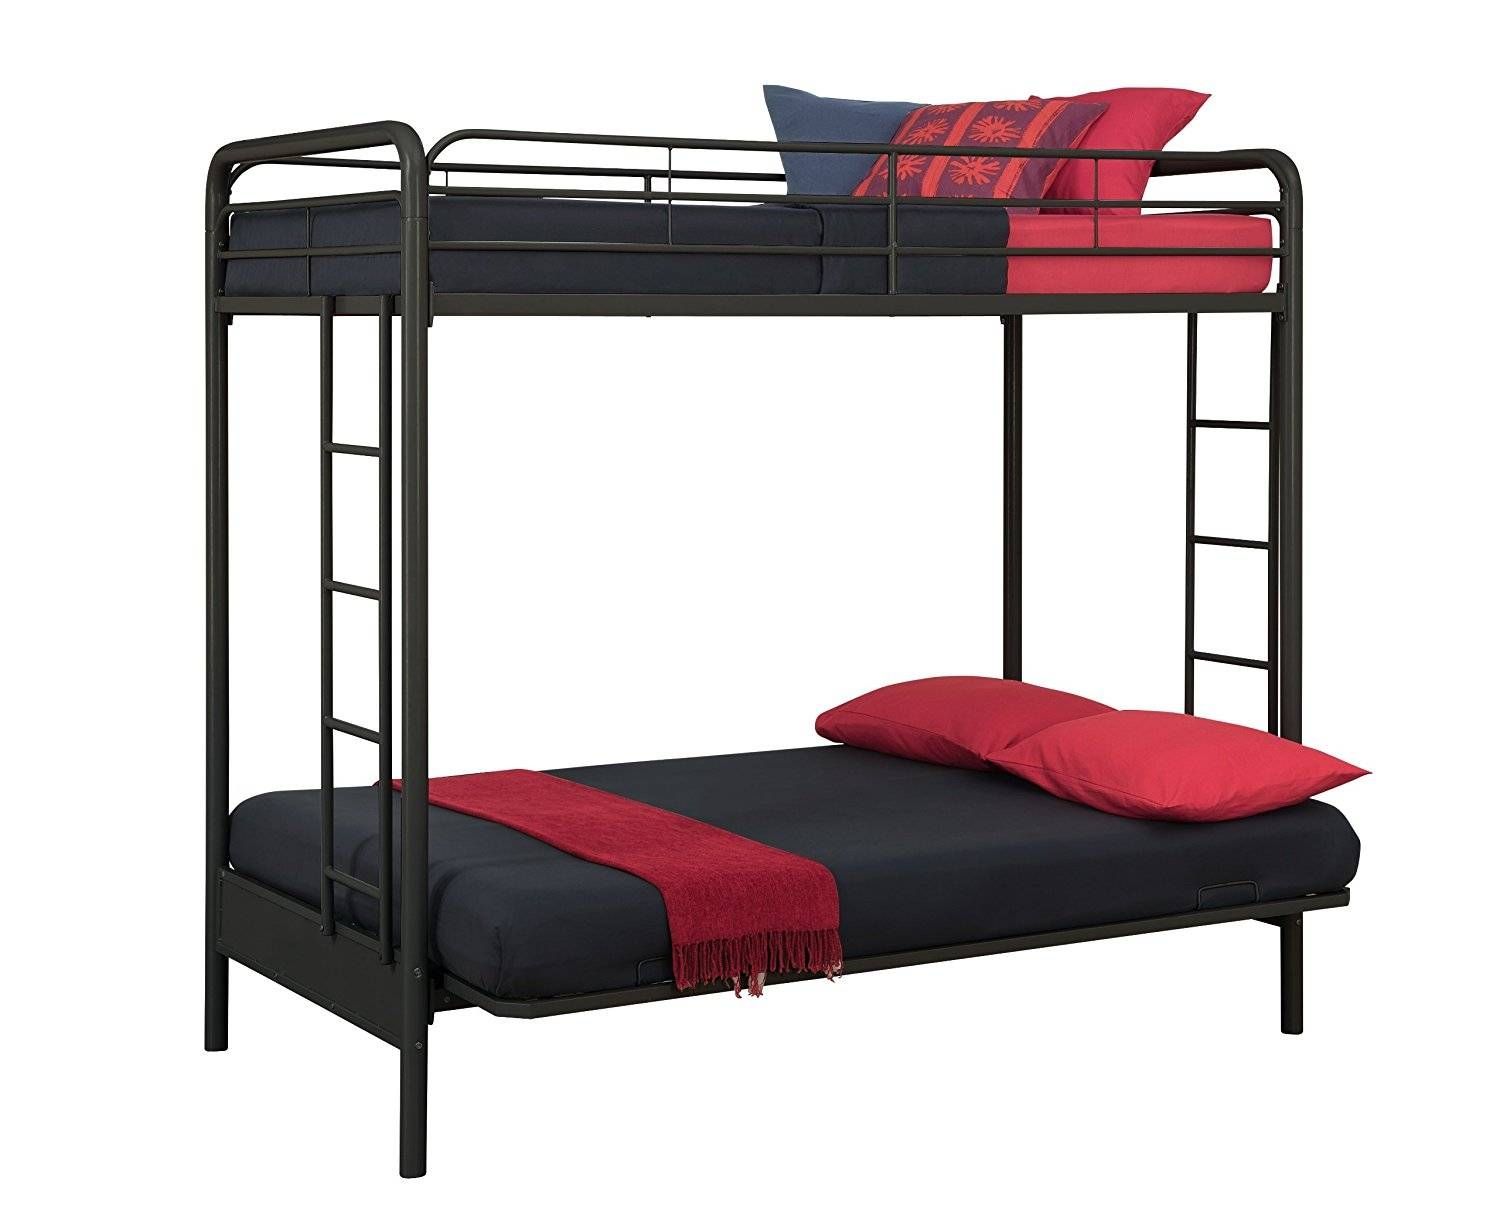 Furniture: Futon Kmart For Easily Convert To A Bed — Iahrapd2016 With Regard To Kmart Bunk Bed Mattress (View 8 of 15)